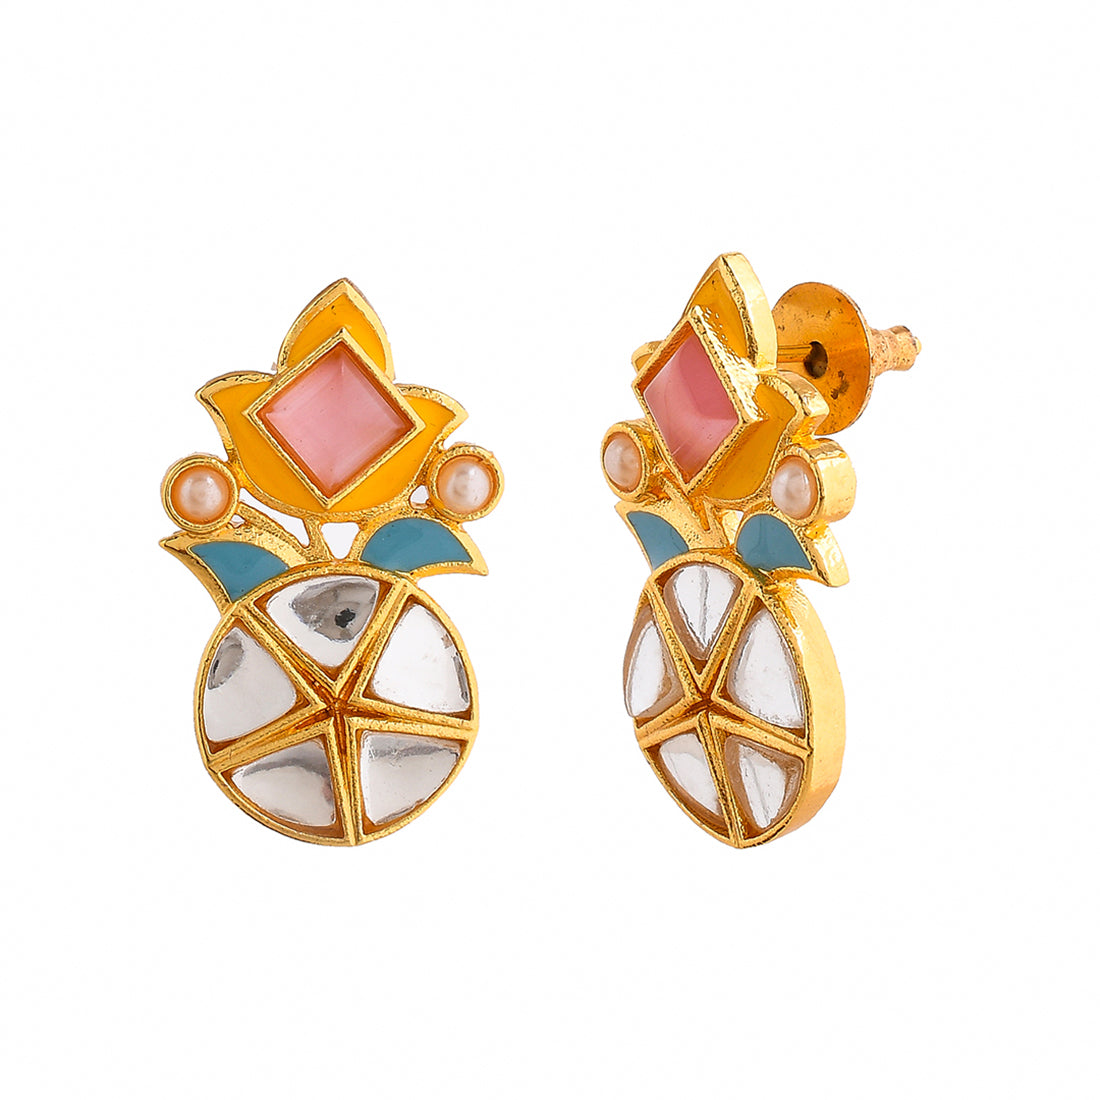 Forever More Floral Pink Stone and Pearl Earrings